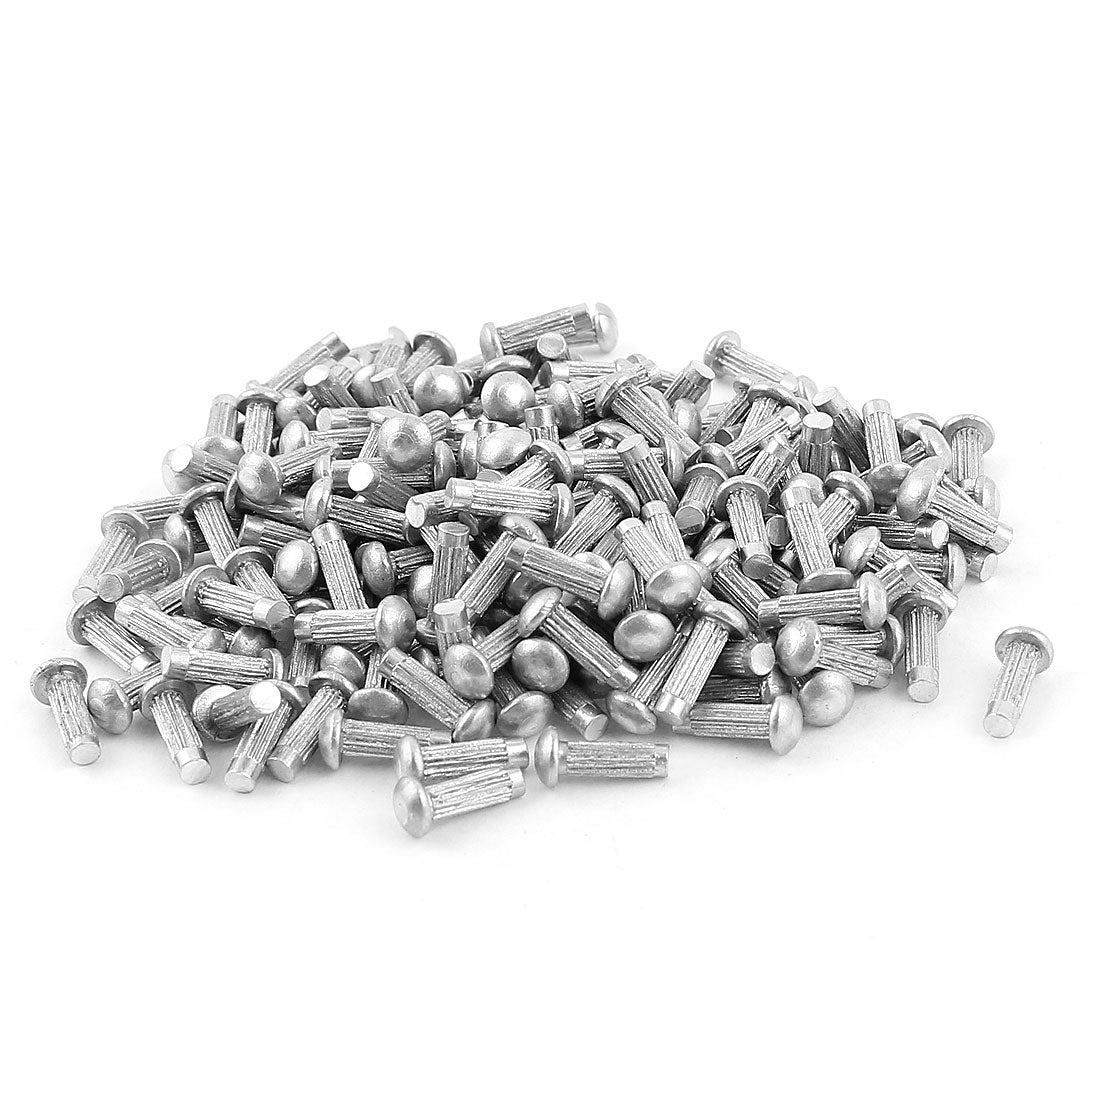 uxcell Uxcell 200 Pcs 3/32" x 5/16" Aluminium Round Head Solid Rivets Knurled Shanks